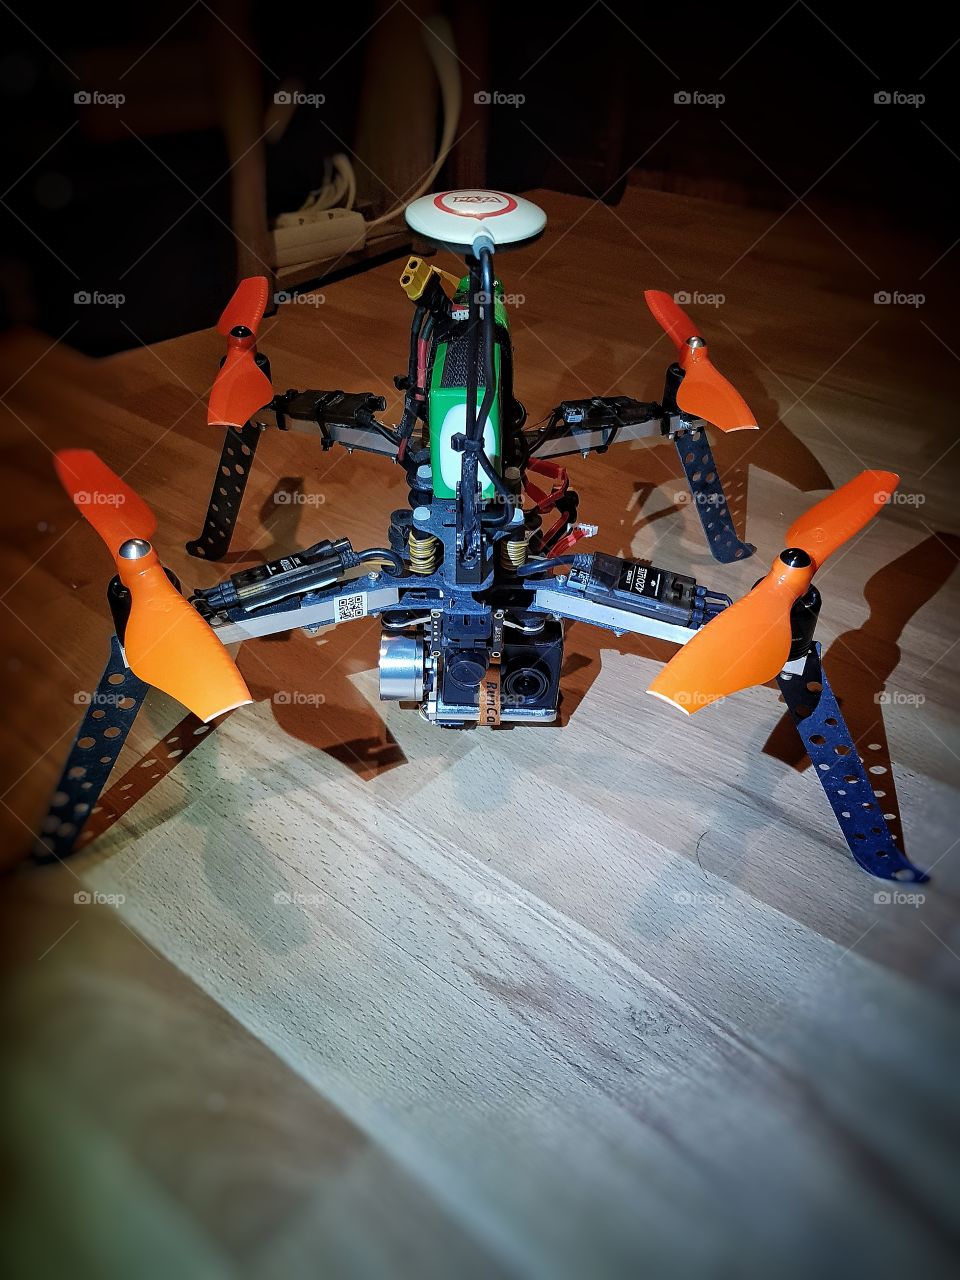 ready to go with my selfmade drone 🤓